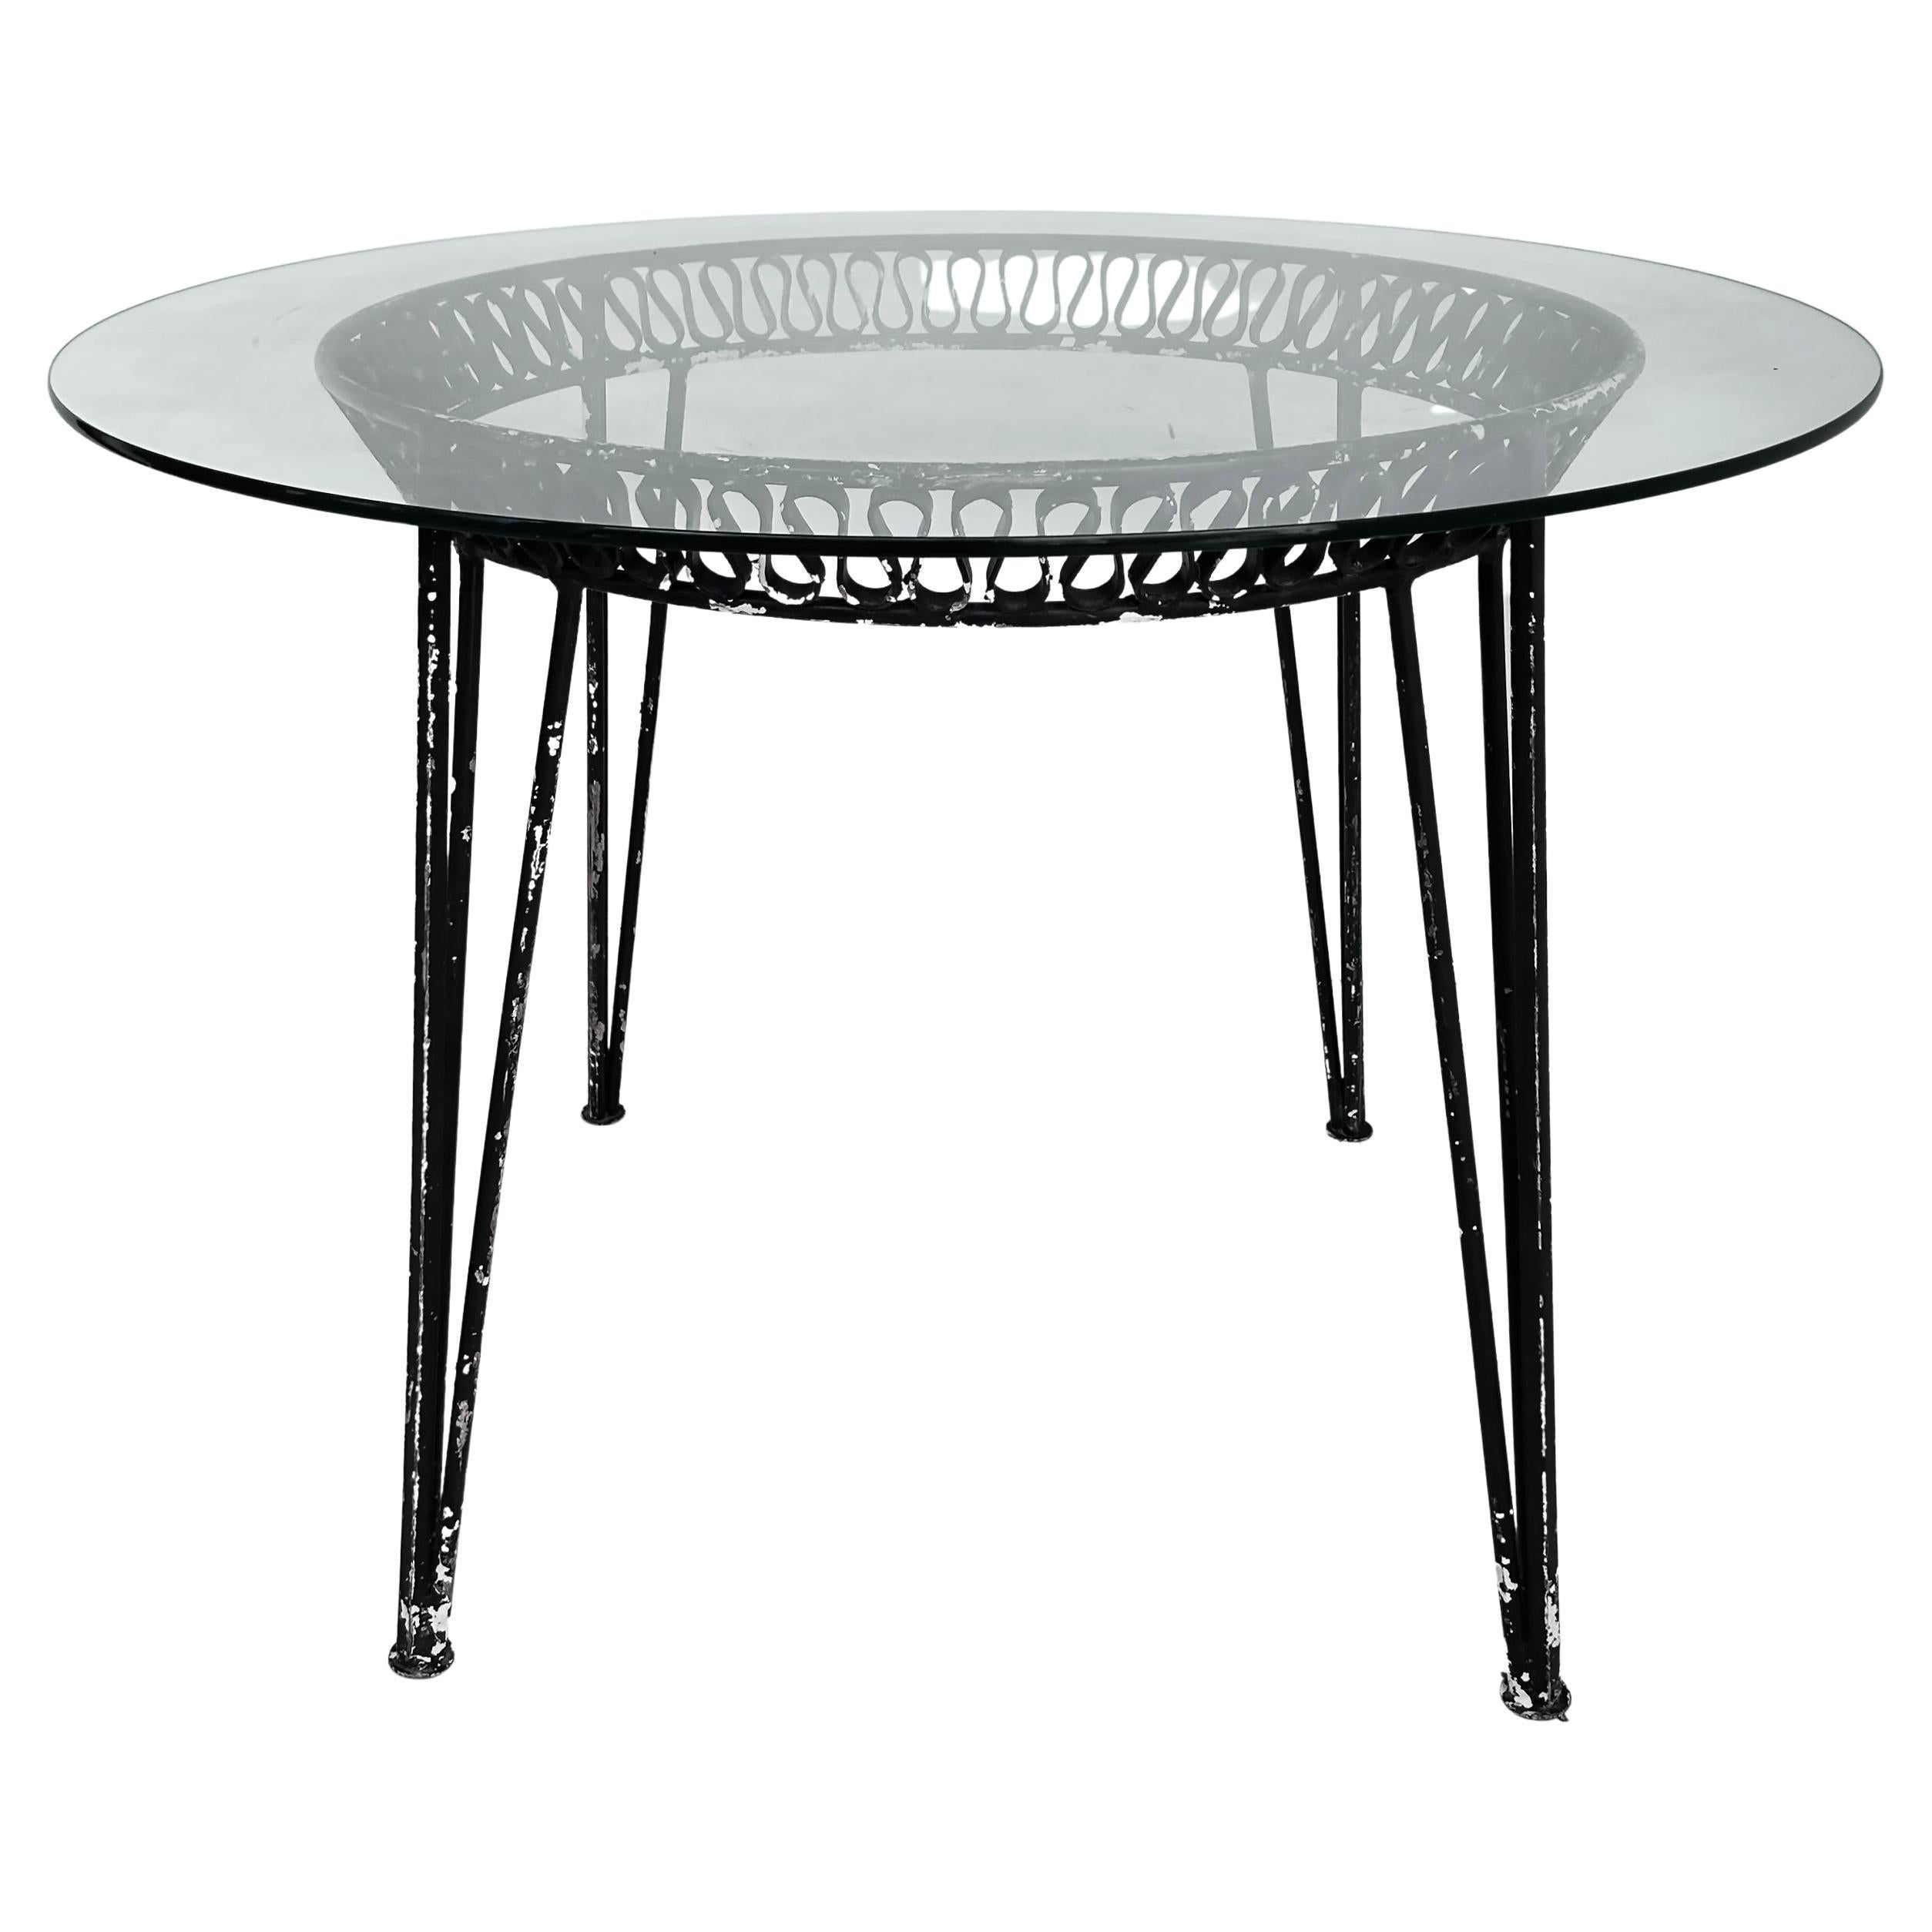 Vintage Salterini Ribbon Style Mid-20th Century Modern Round Table and Glass Top For Sale